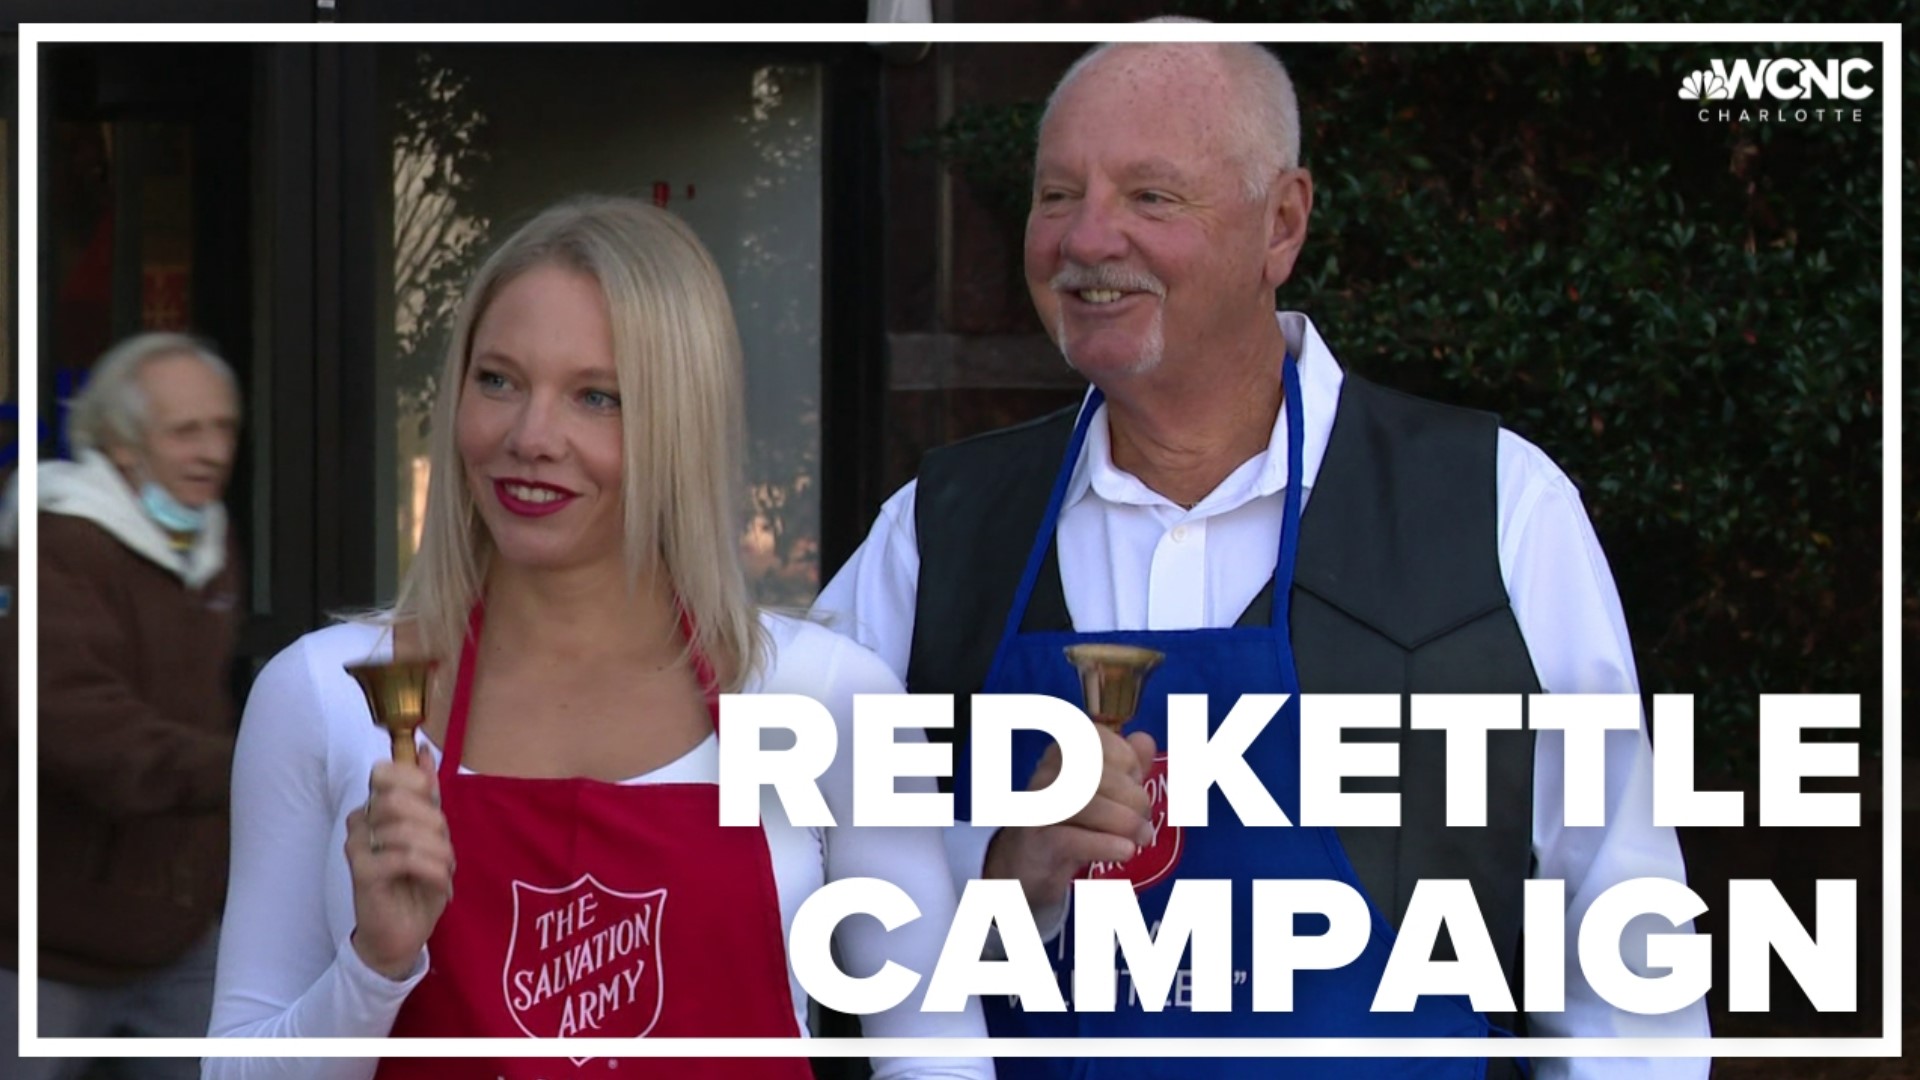 The Salvation Army's Red Kettle Campaign has been a holiday staple for more than 125 years, collecting funds for year-round programs serving those in need.